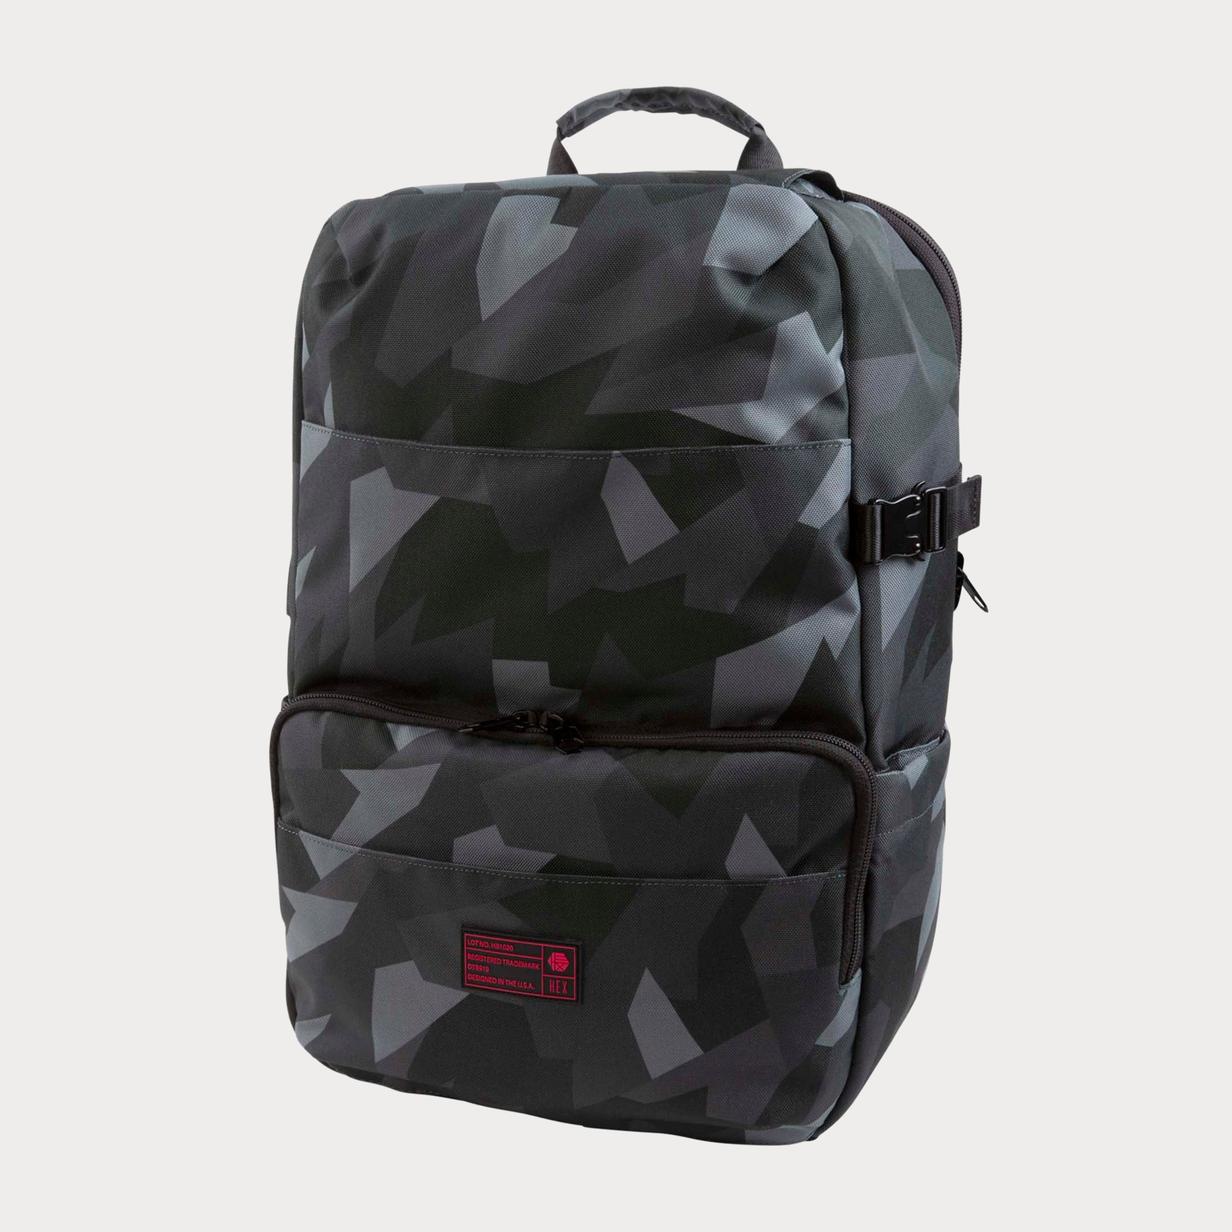 Moment Hex HX2785 GYCM Technical Backpack Glacier Camo 01